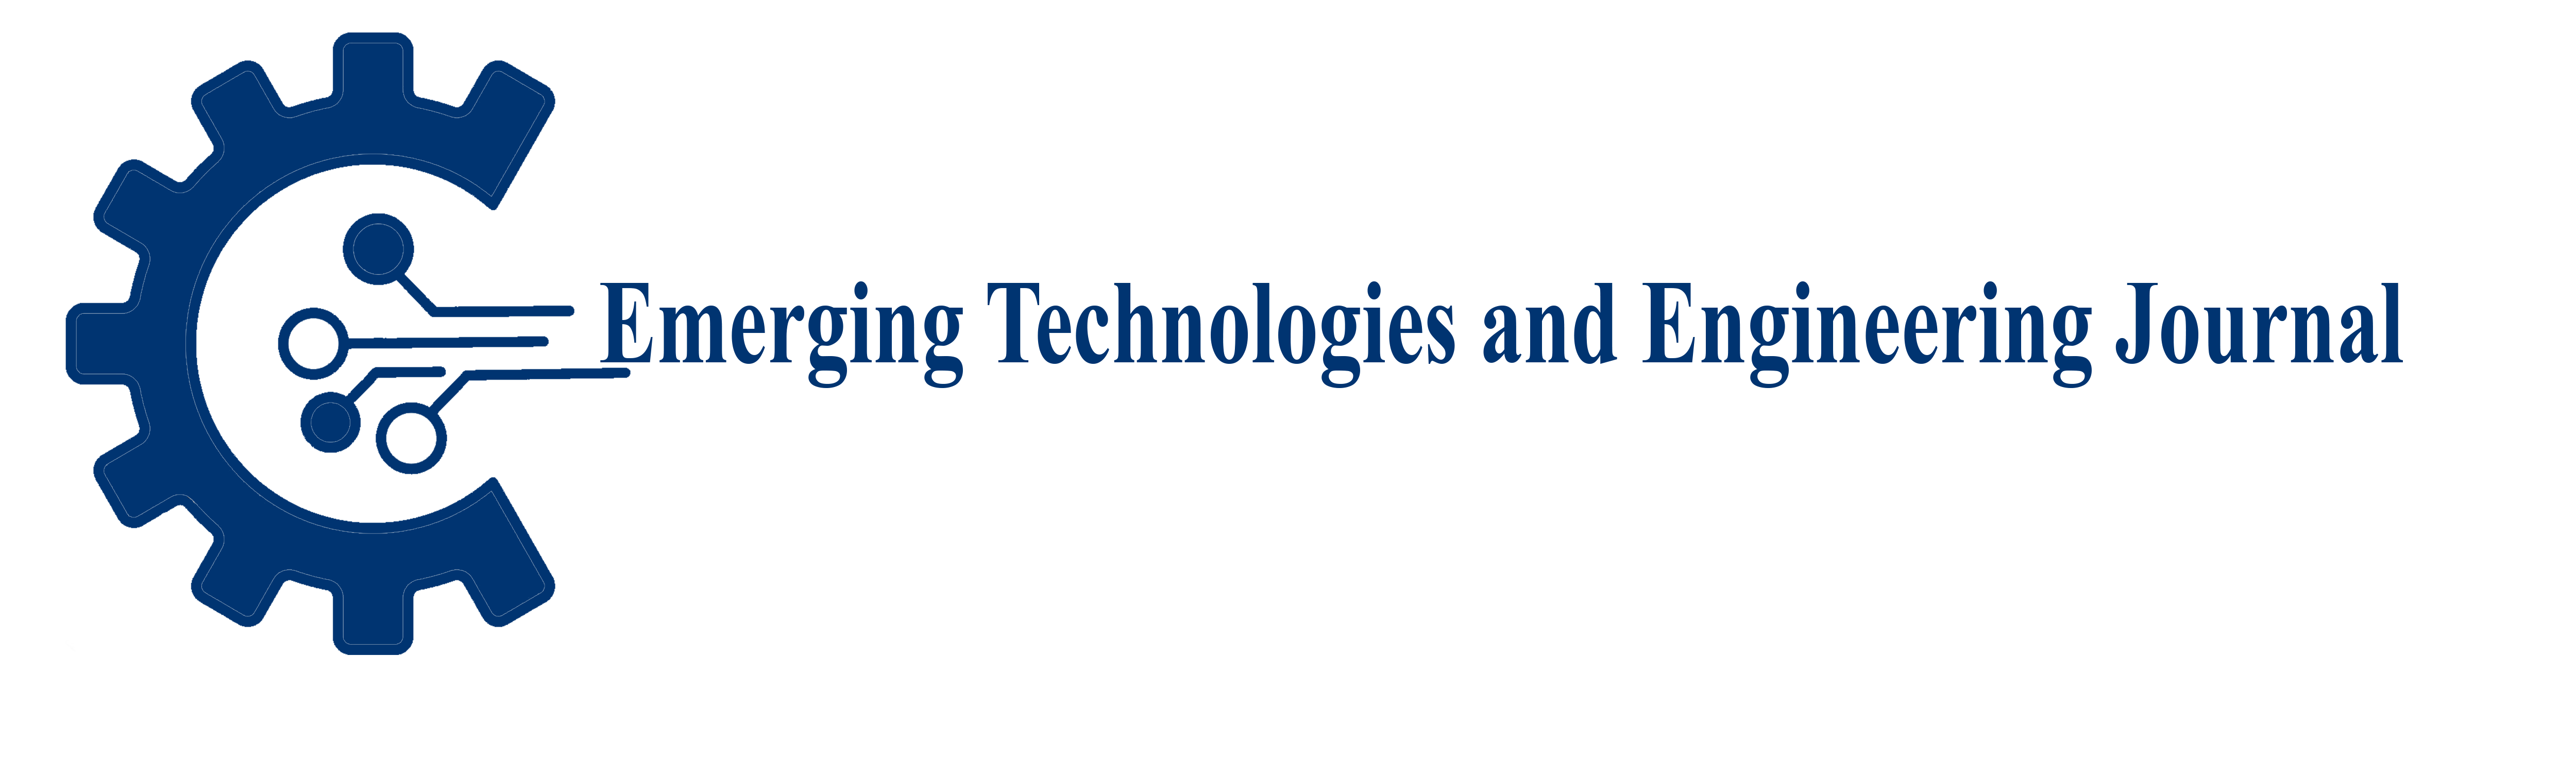 Emerging Technologies and Engineering Journal